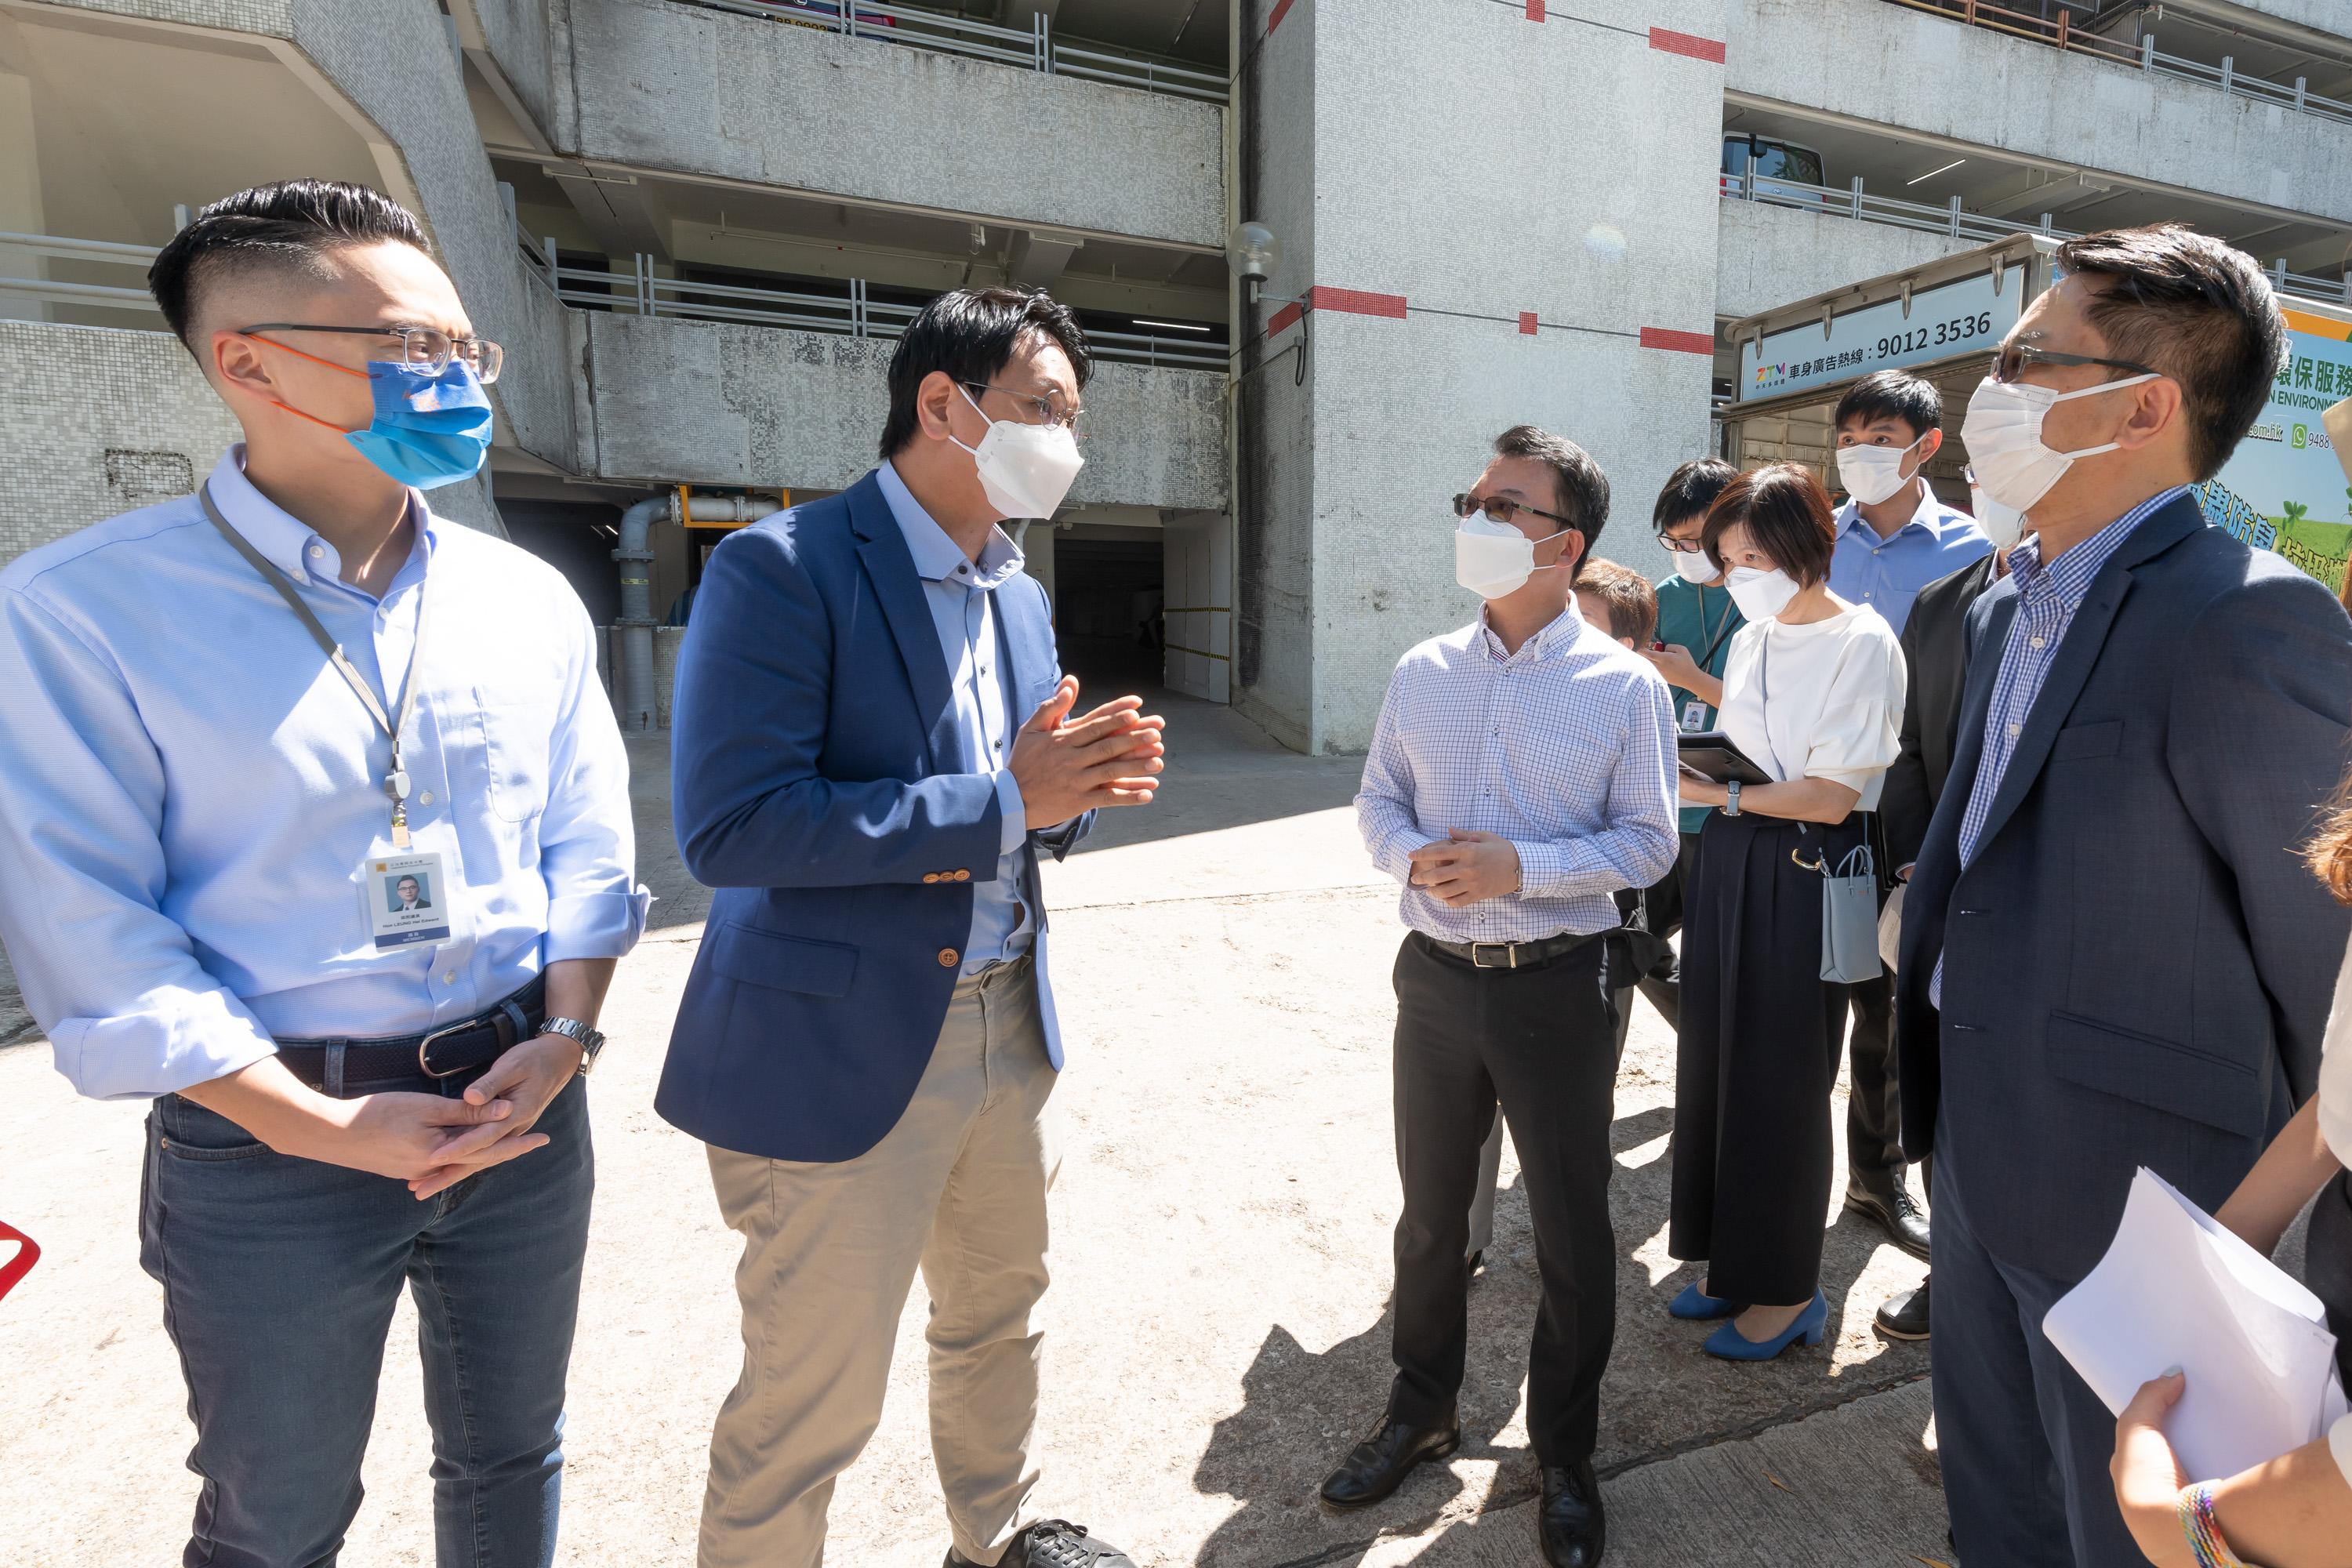 Members of the Legislative Council (LegCo) conducted a site visit at the staircases on the slope of Lok Wah North Estate in Kwun Tong today (October 12) to follow up on a complaint case relating to retrofitting barrier-free access facilities. Photo shows LegCo Members exchanging views with government representatives on retrofitting more comprehensive barrier-free access facilities.